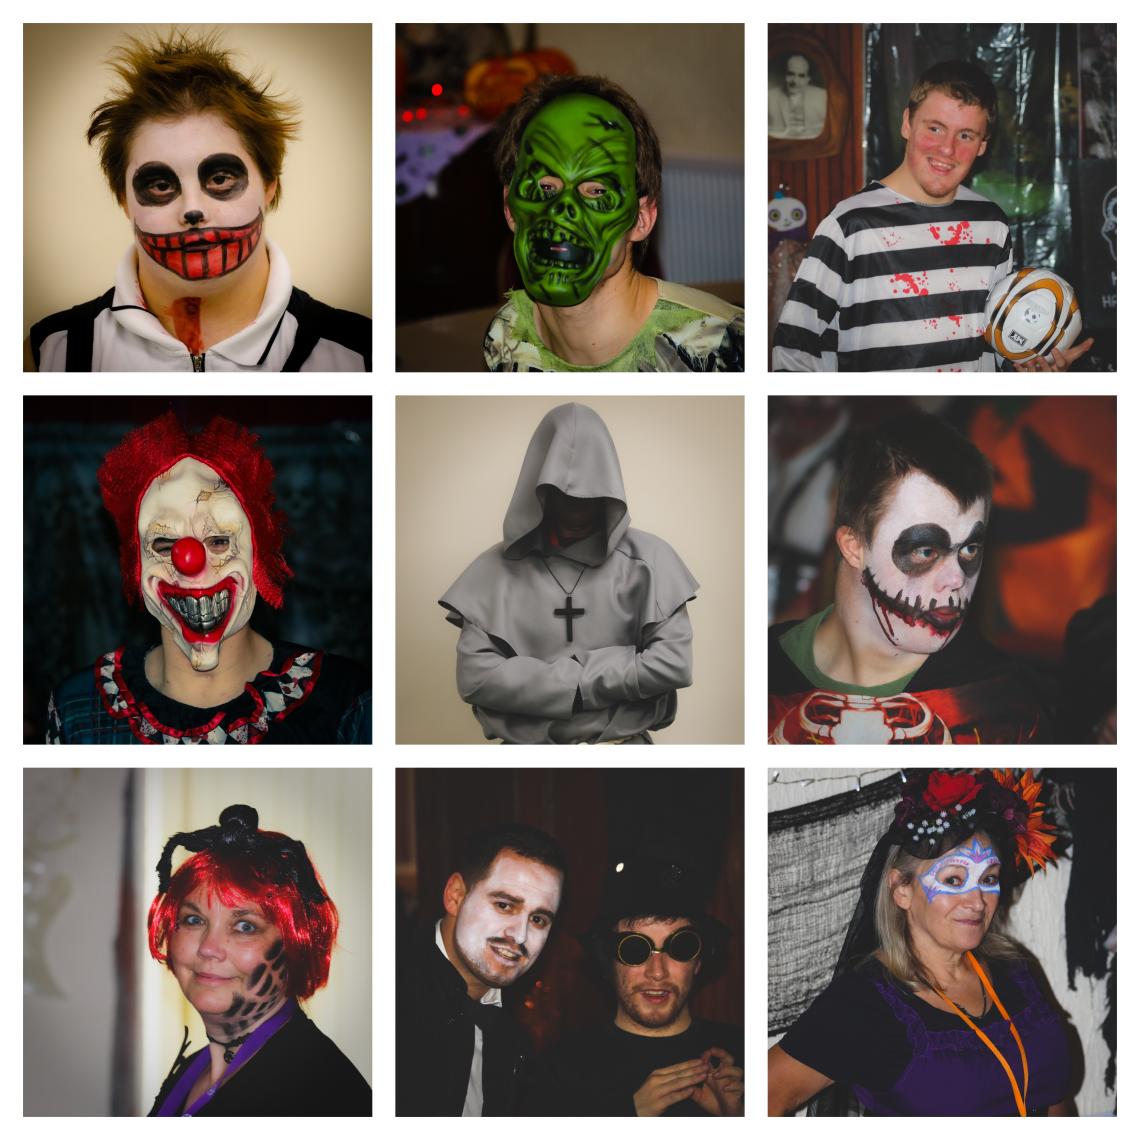  A collage of images showing people dressed up for Halloween.